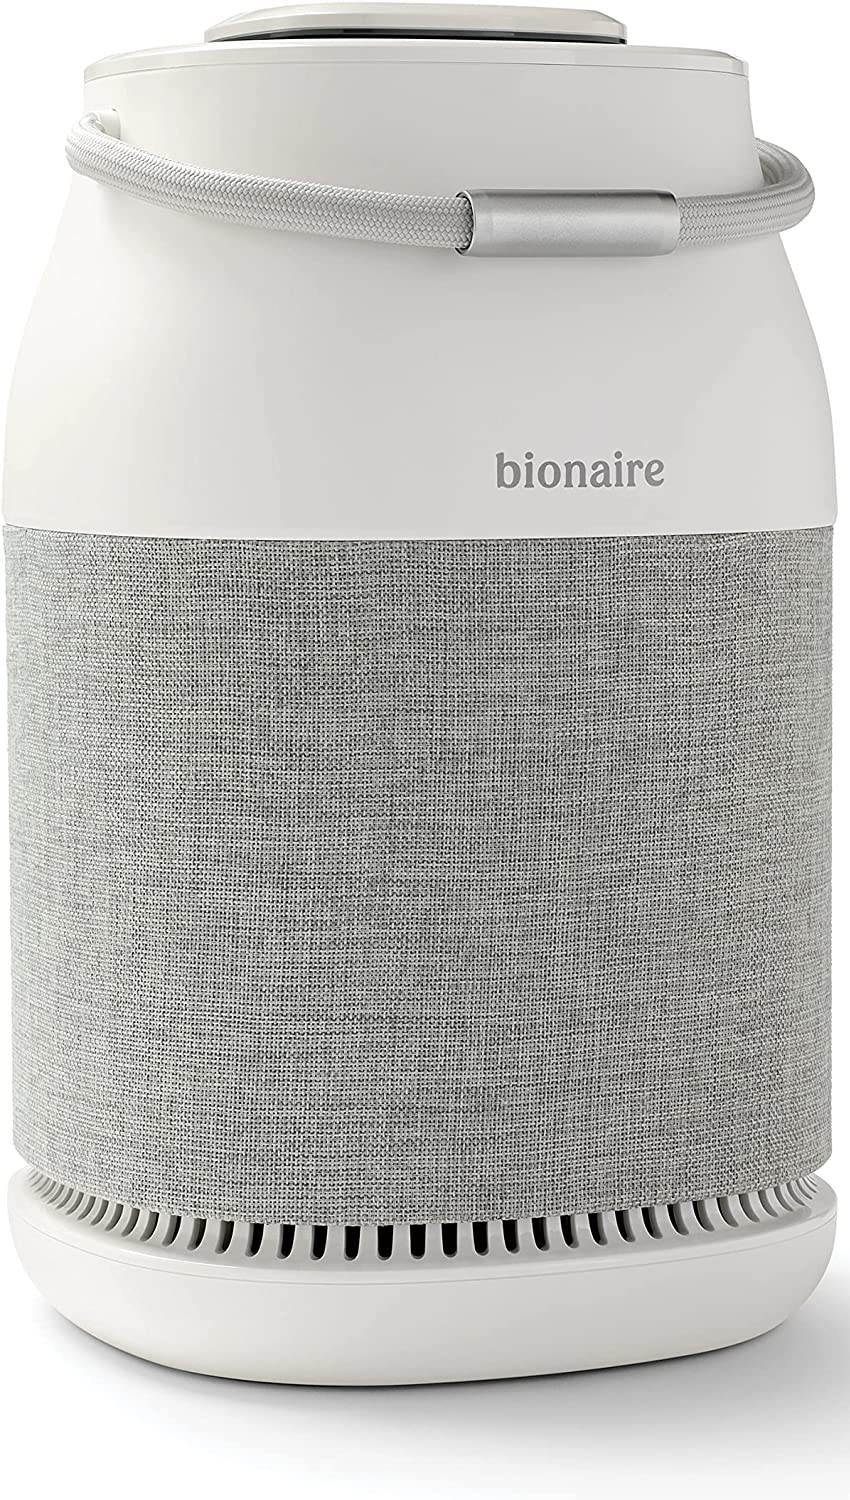 Amazon: Bionaire True HEPA 360° UV Air Purifier with 6-Stage Filtration $89.99 W/ Coupon + Free Shipping W/ Prime